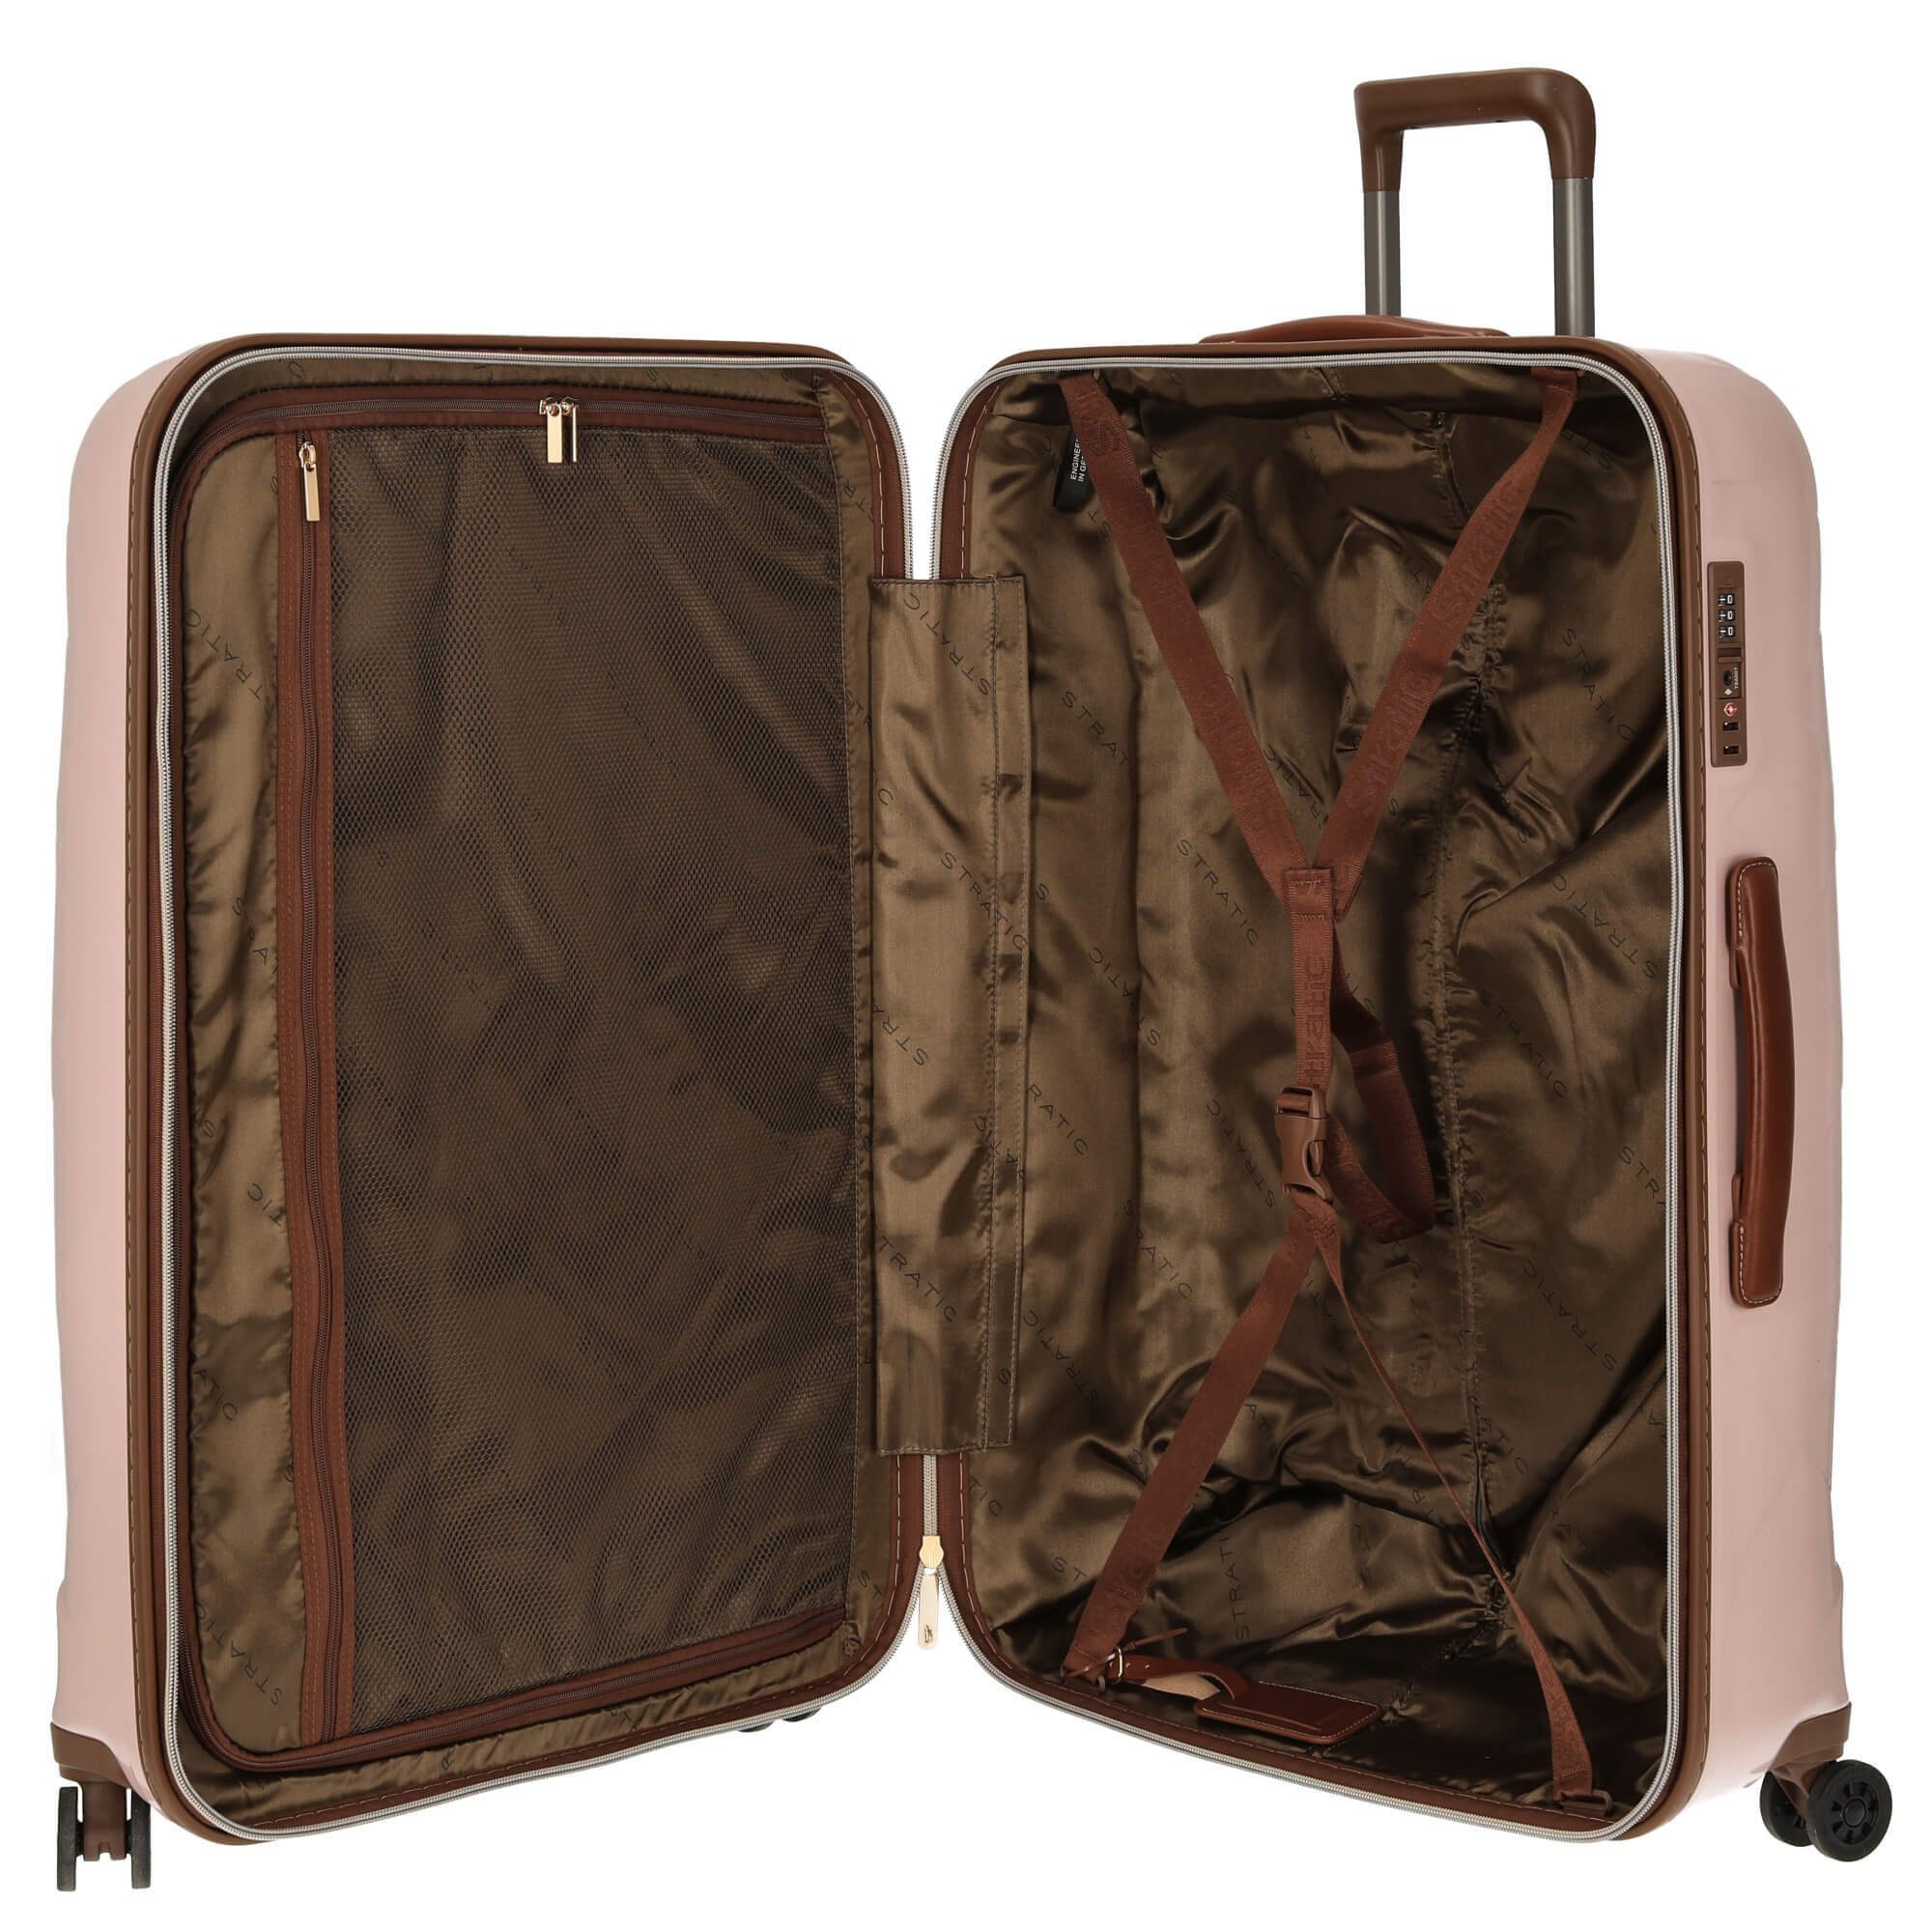 Stratic Trolley cm and More 4-Rollen-Trolley - Rollen 76 L, 4 Leather rose